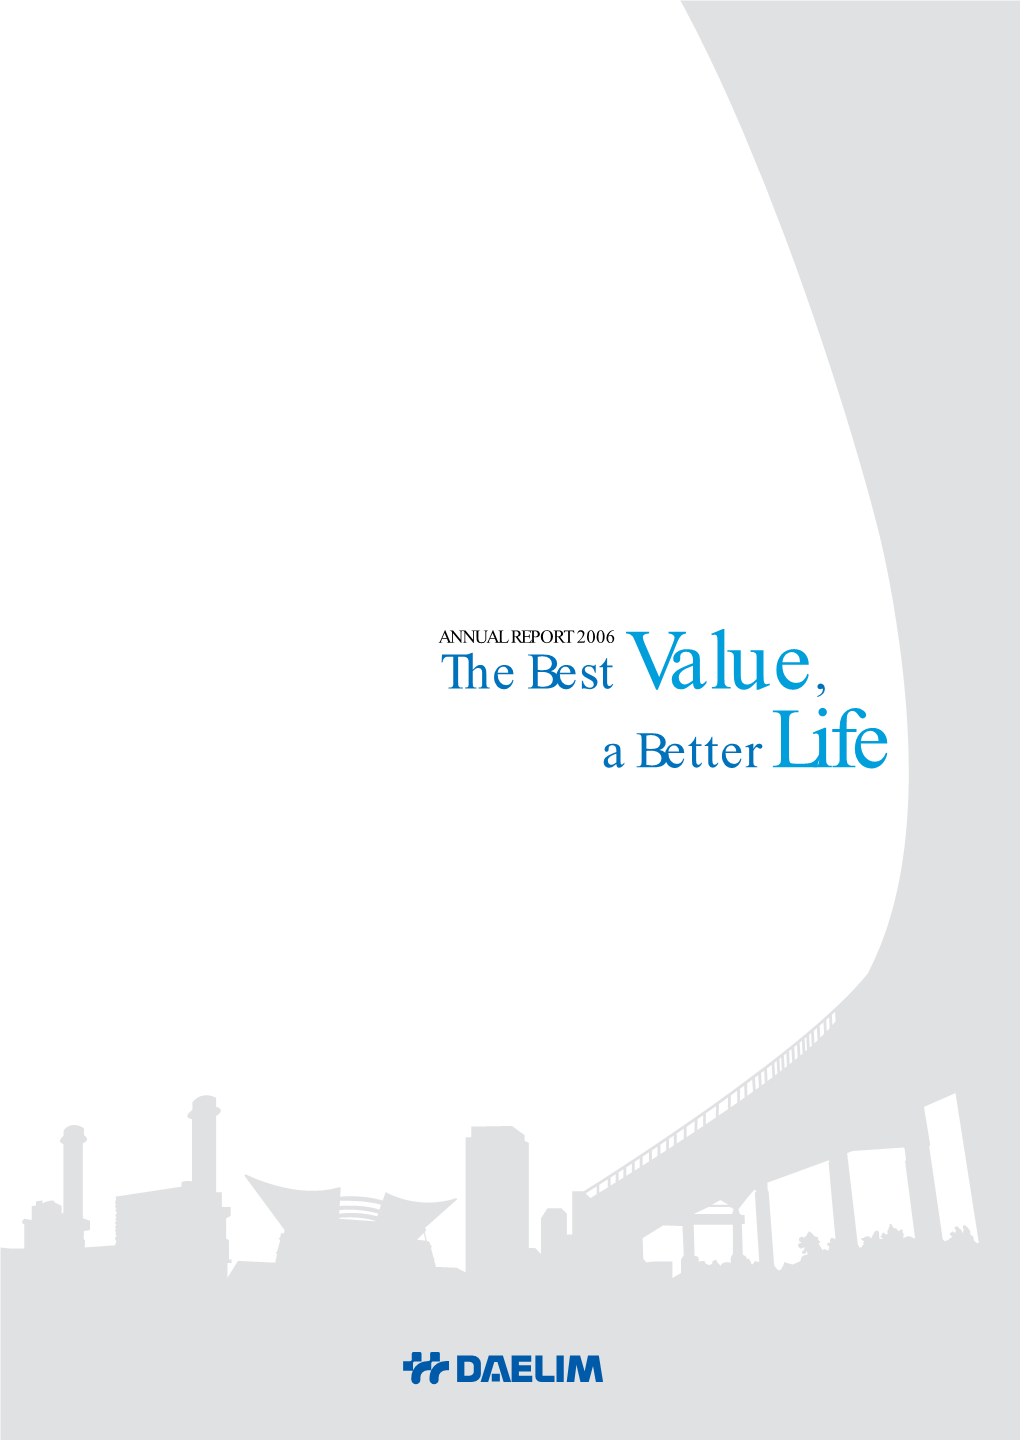 The Best Value, a Better Life ANNUAL REPORT 2006 the Best Value, a Better Life Copyright ⓒ 2006 by Daelim Industrial Co., Ltd